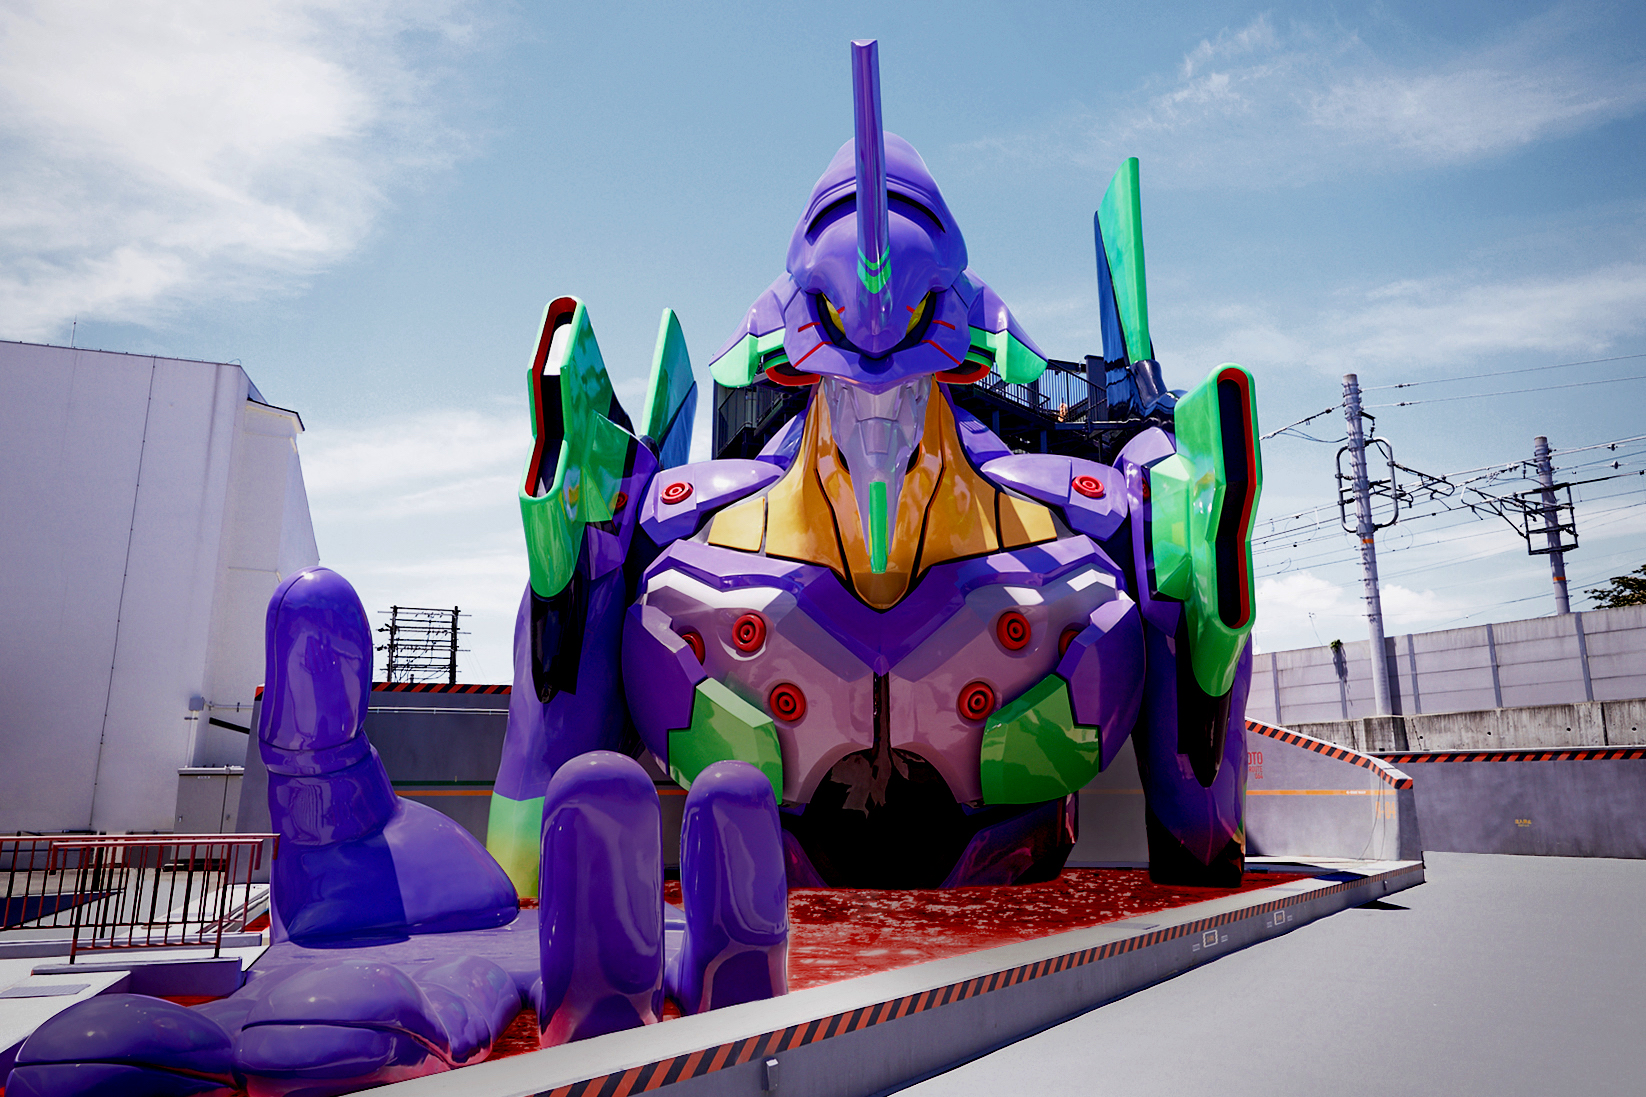 TOEI Kyoto Studio Park Admission Ticket + A Evangelion Original Cup (with soft drink) <Visit a theme park filled with Toei anime character events, ninja experiences, and transformation attractions that will provide an unforgettable experience.>